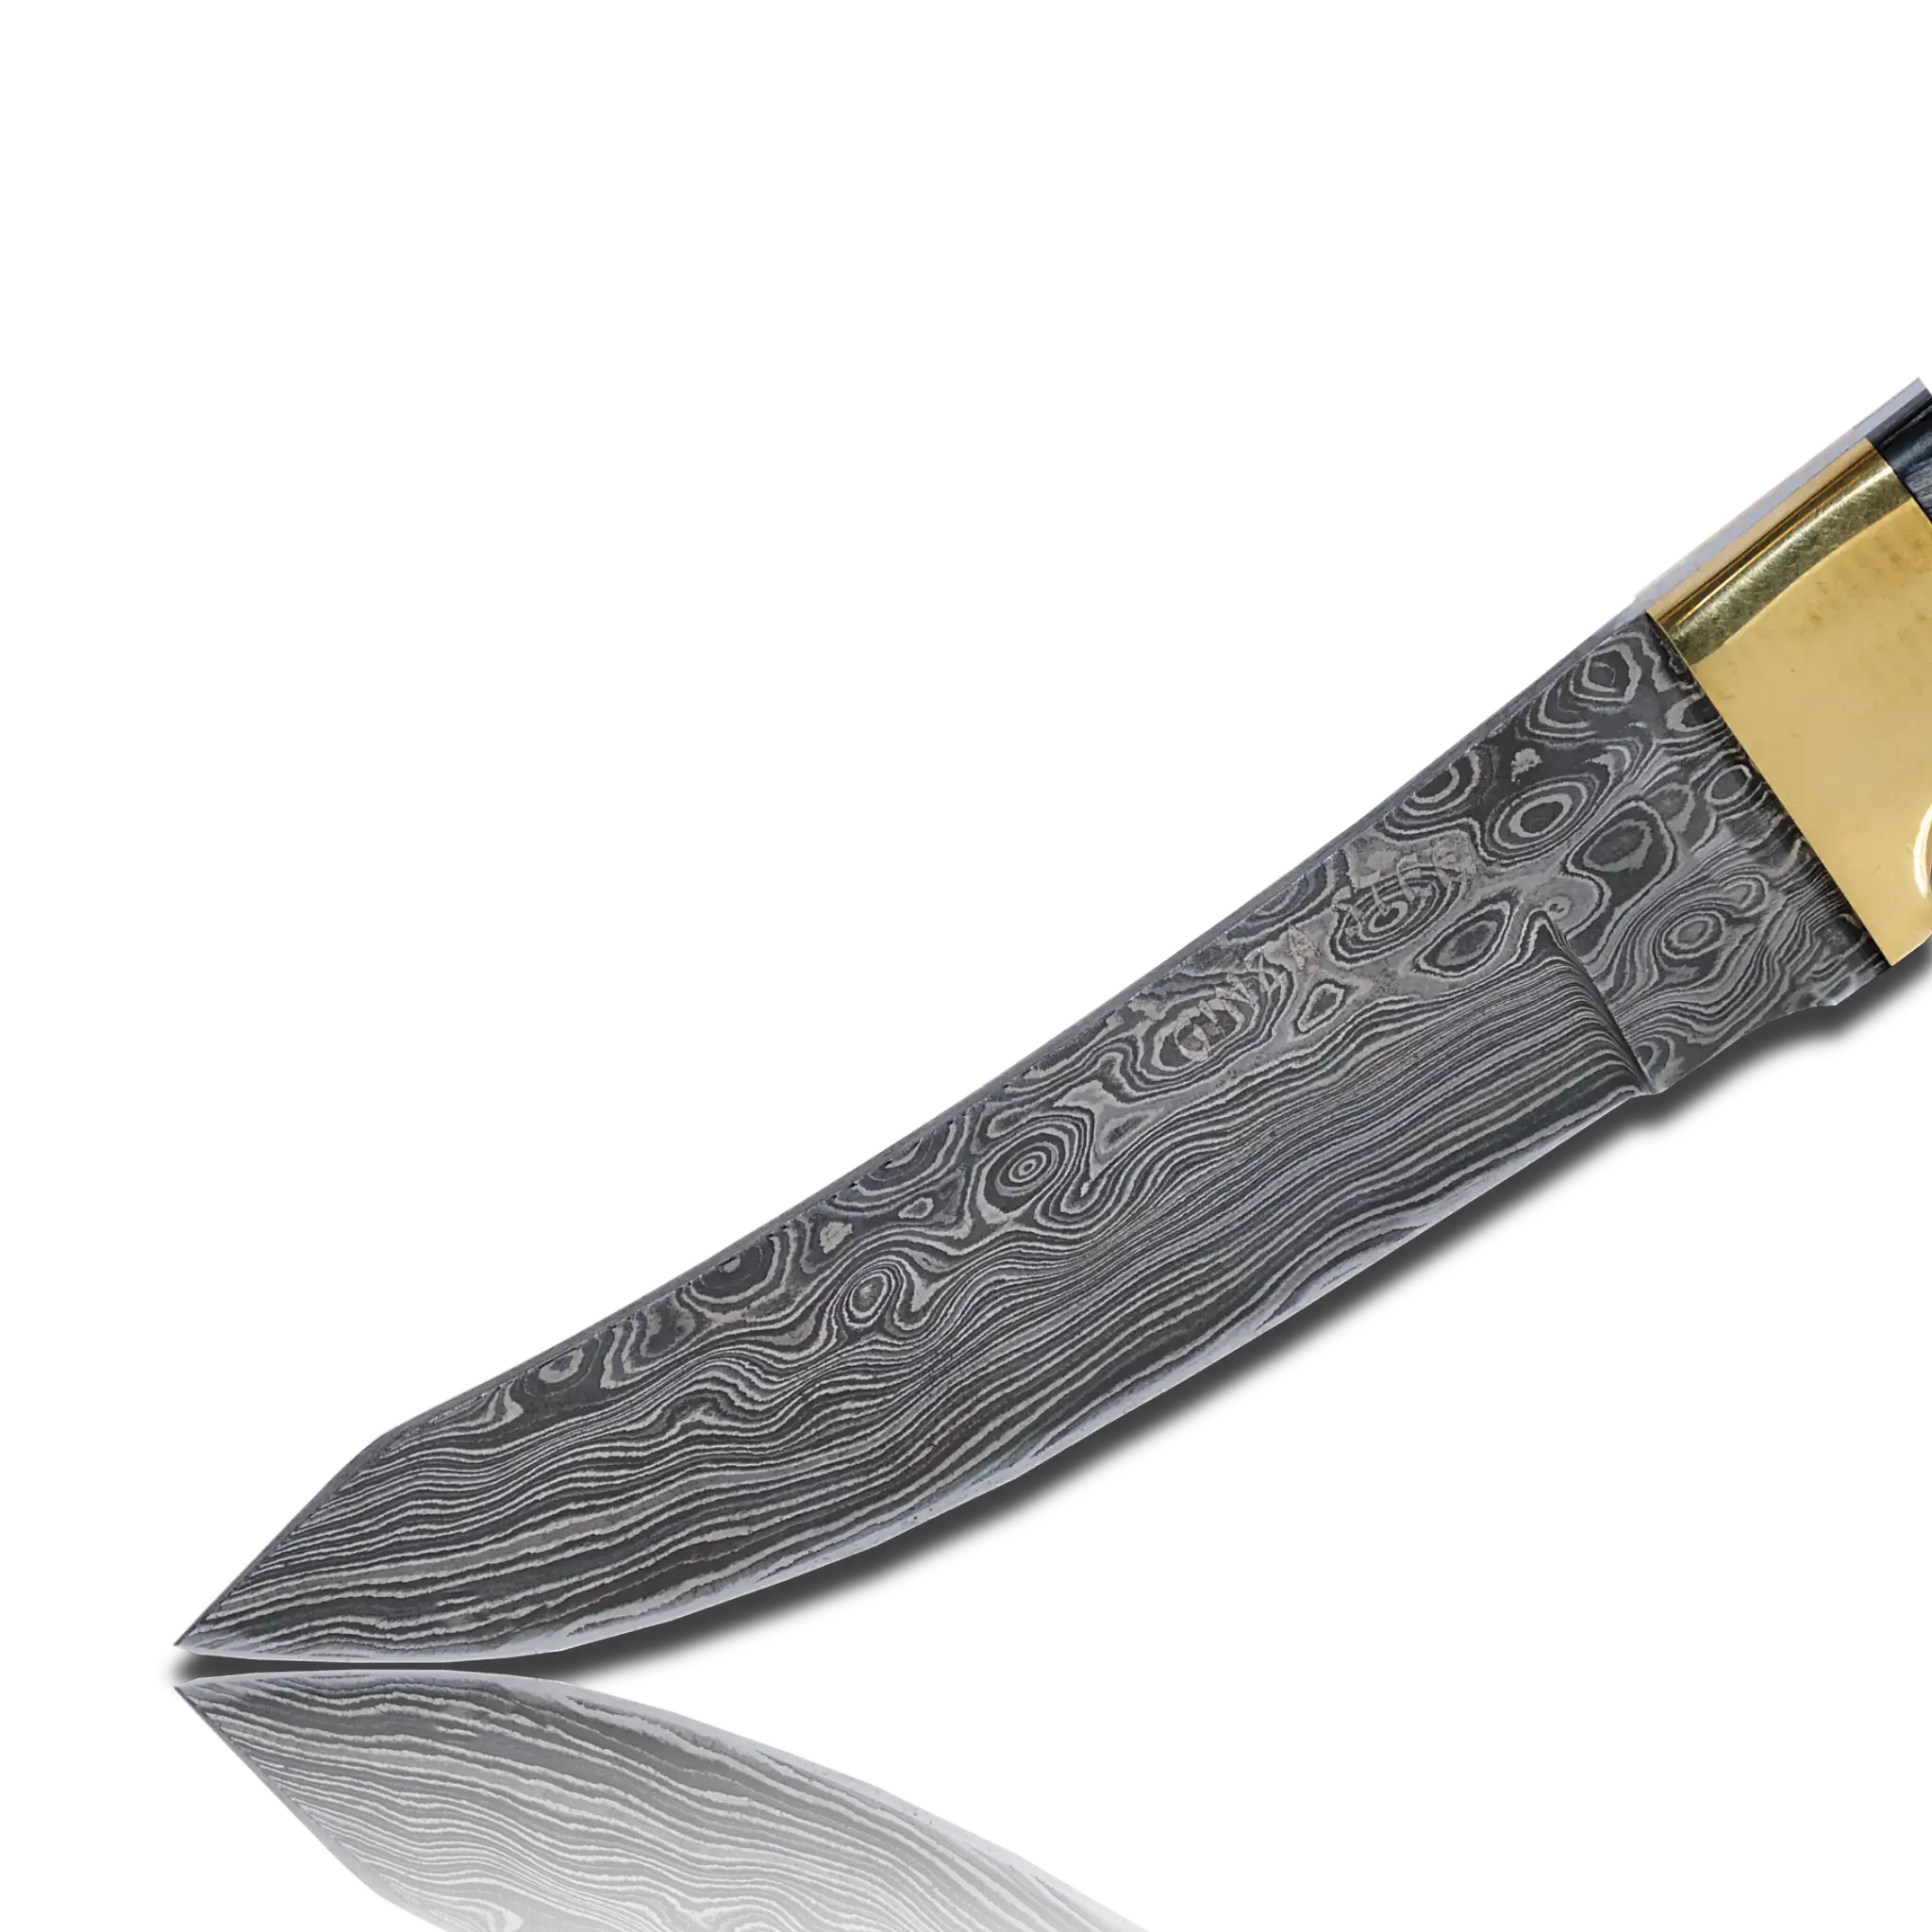 Hatif Hunter Special - Damascus Steel Skinner Knife 5 inch with Leather Sheath